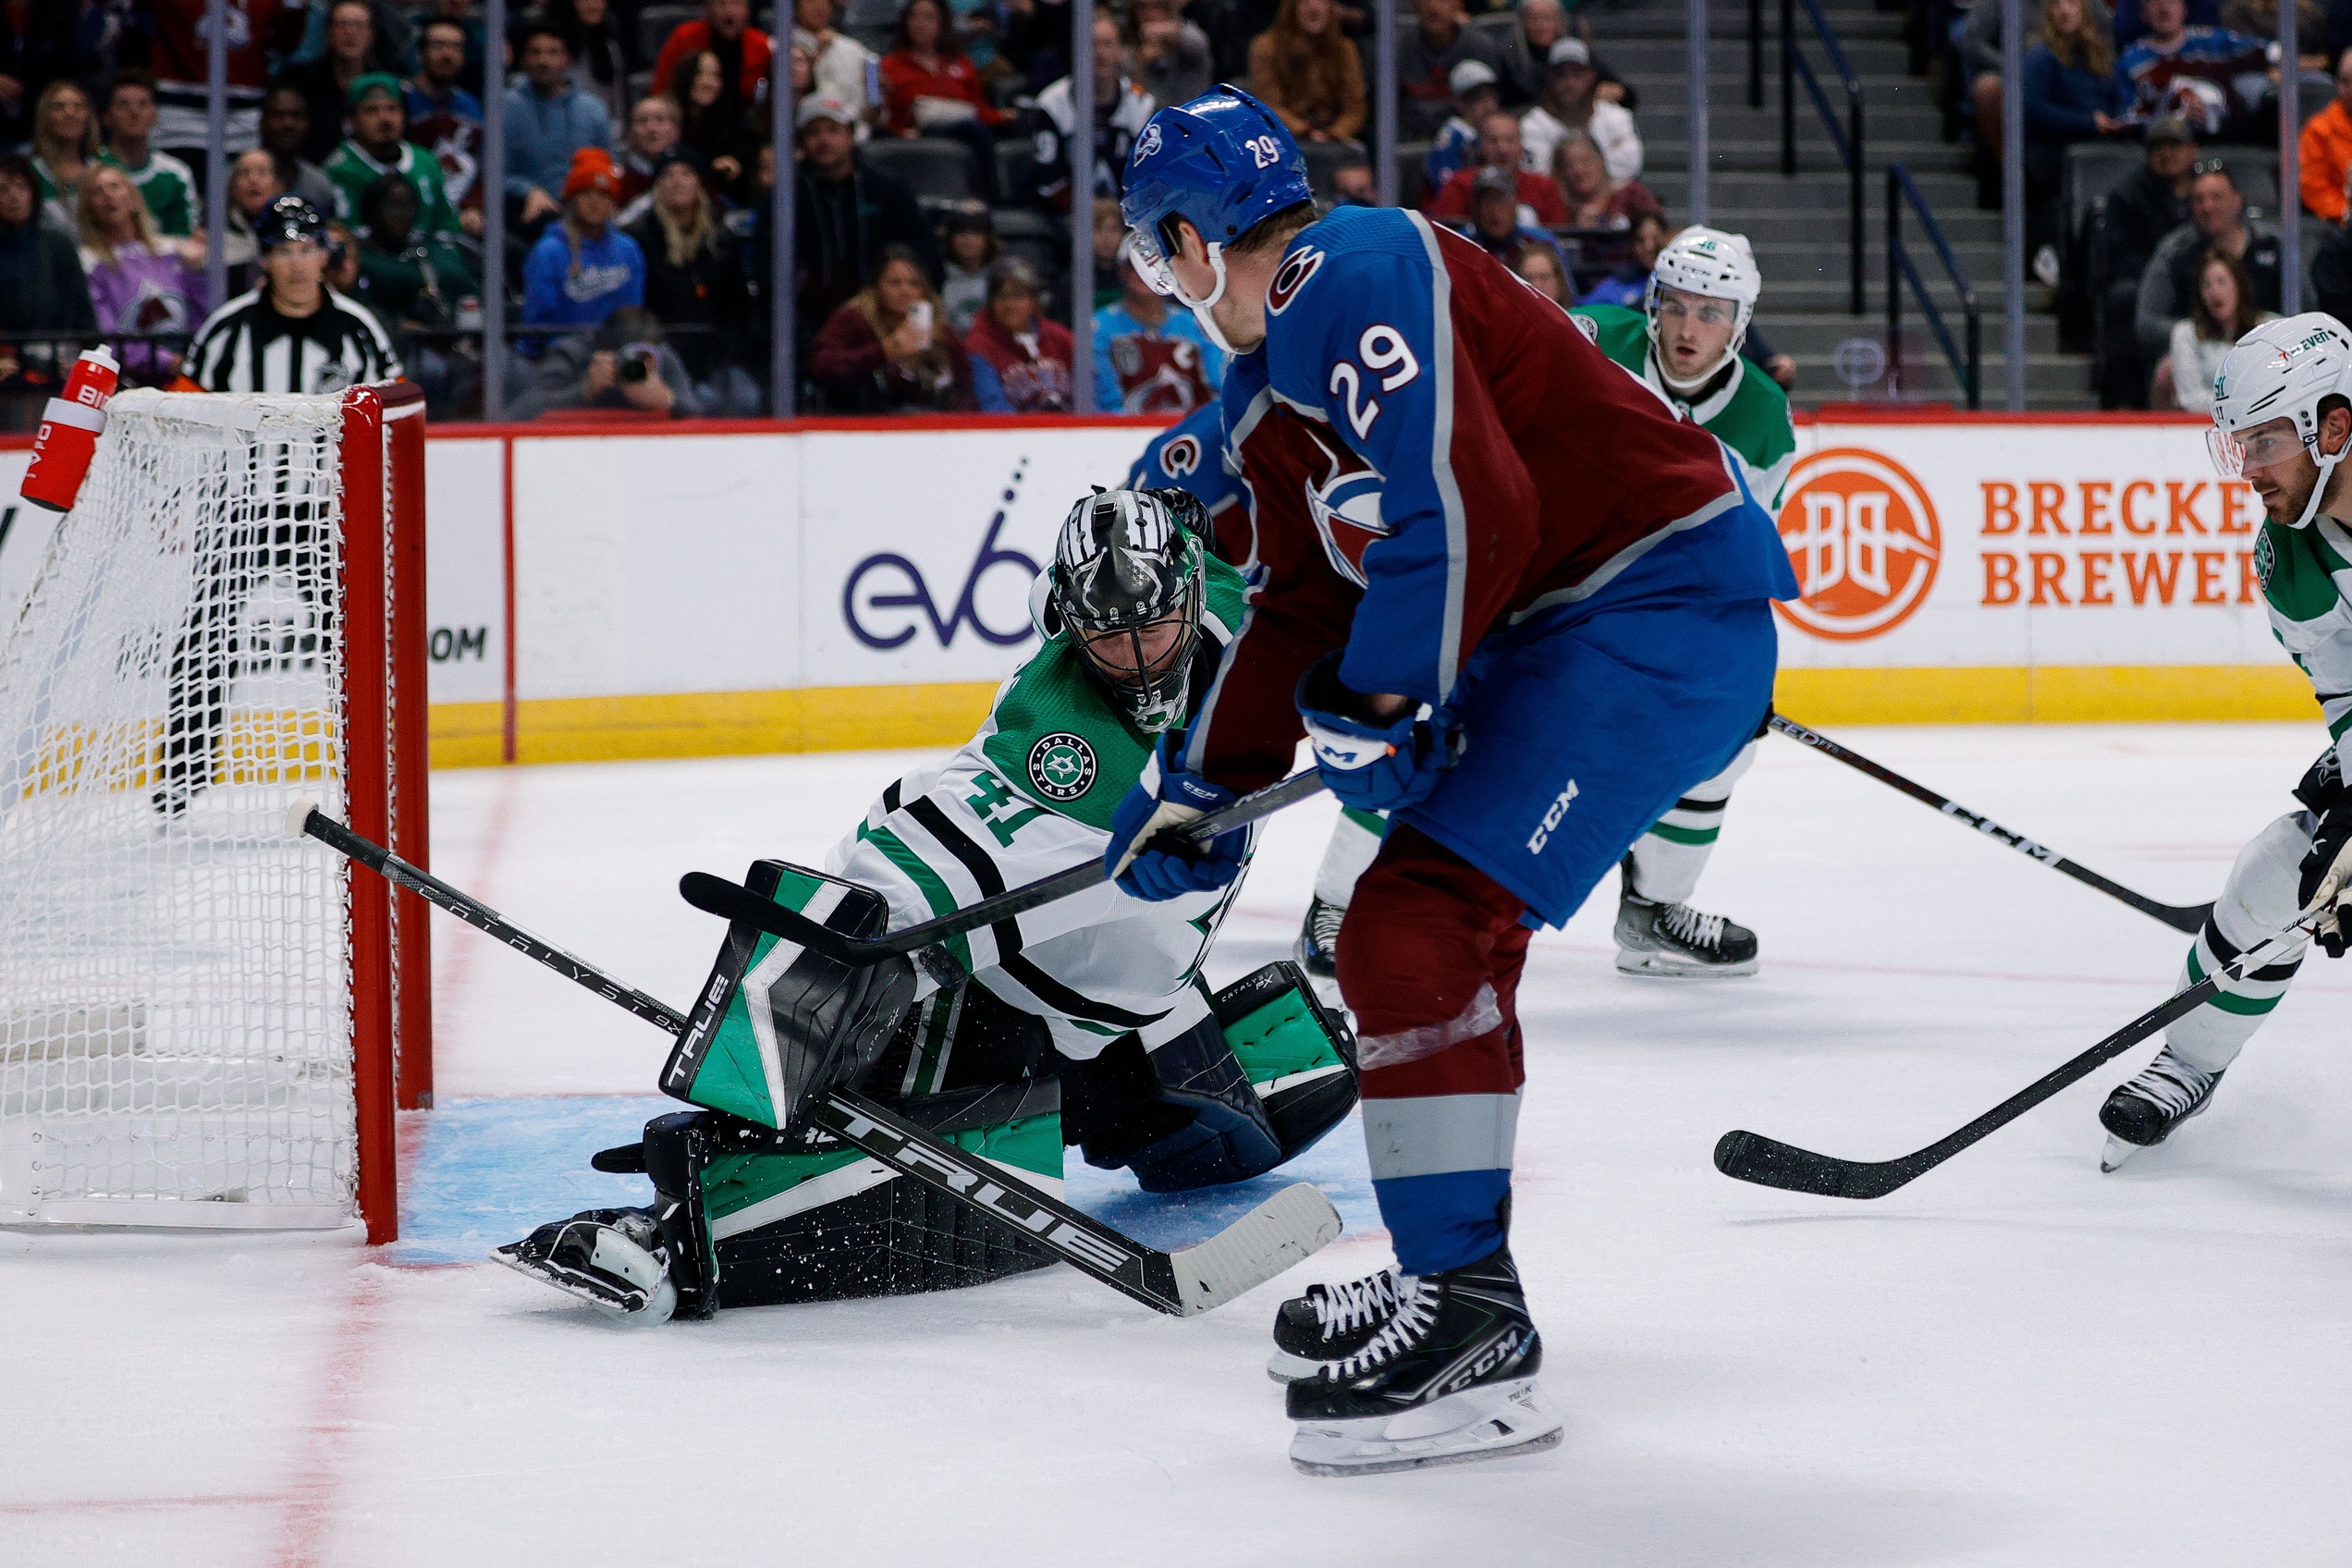 Checking in on the Colorado Avalanche roster battles as preseason